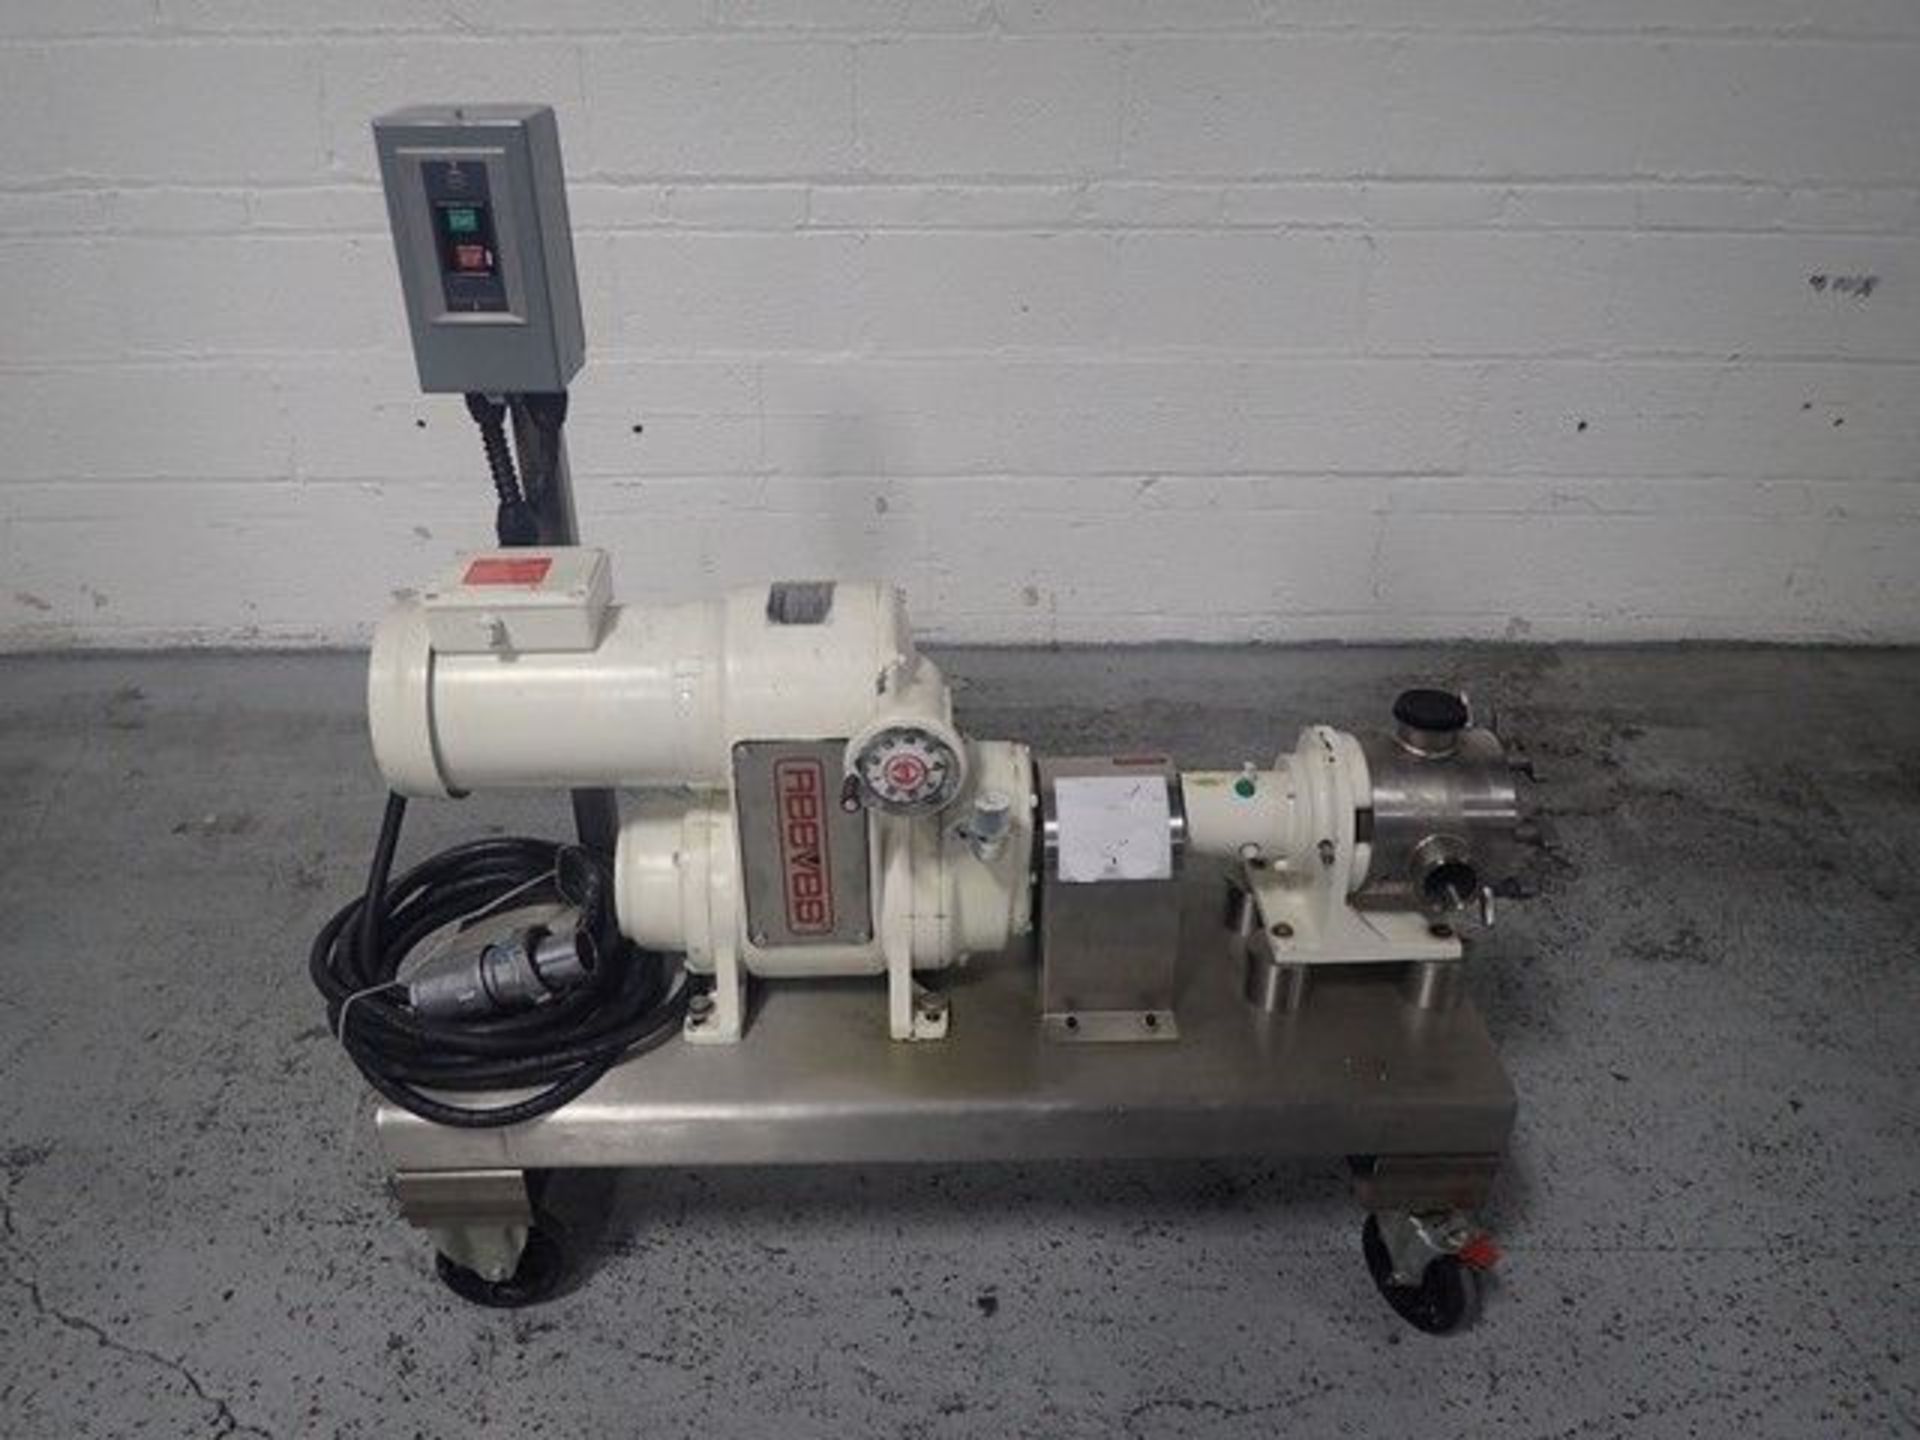 Watson-Marlow Sine pump, model MR120HNTC, stainless steel construction, 2" inlet and outlet